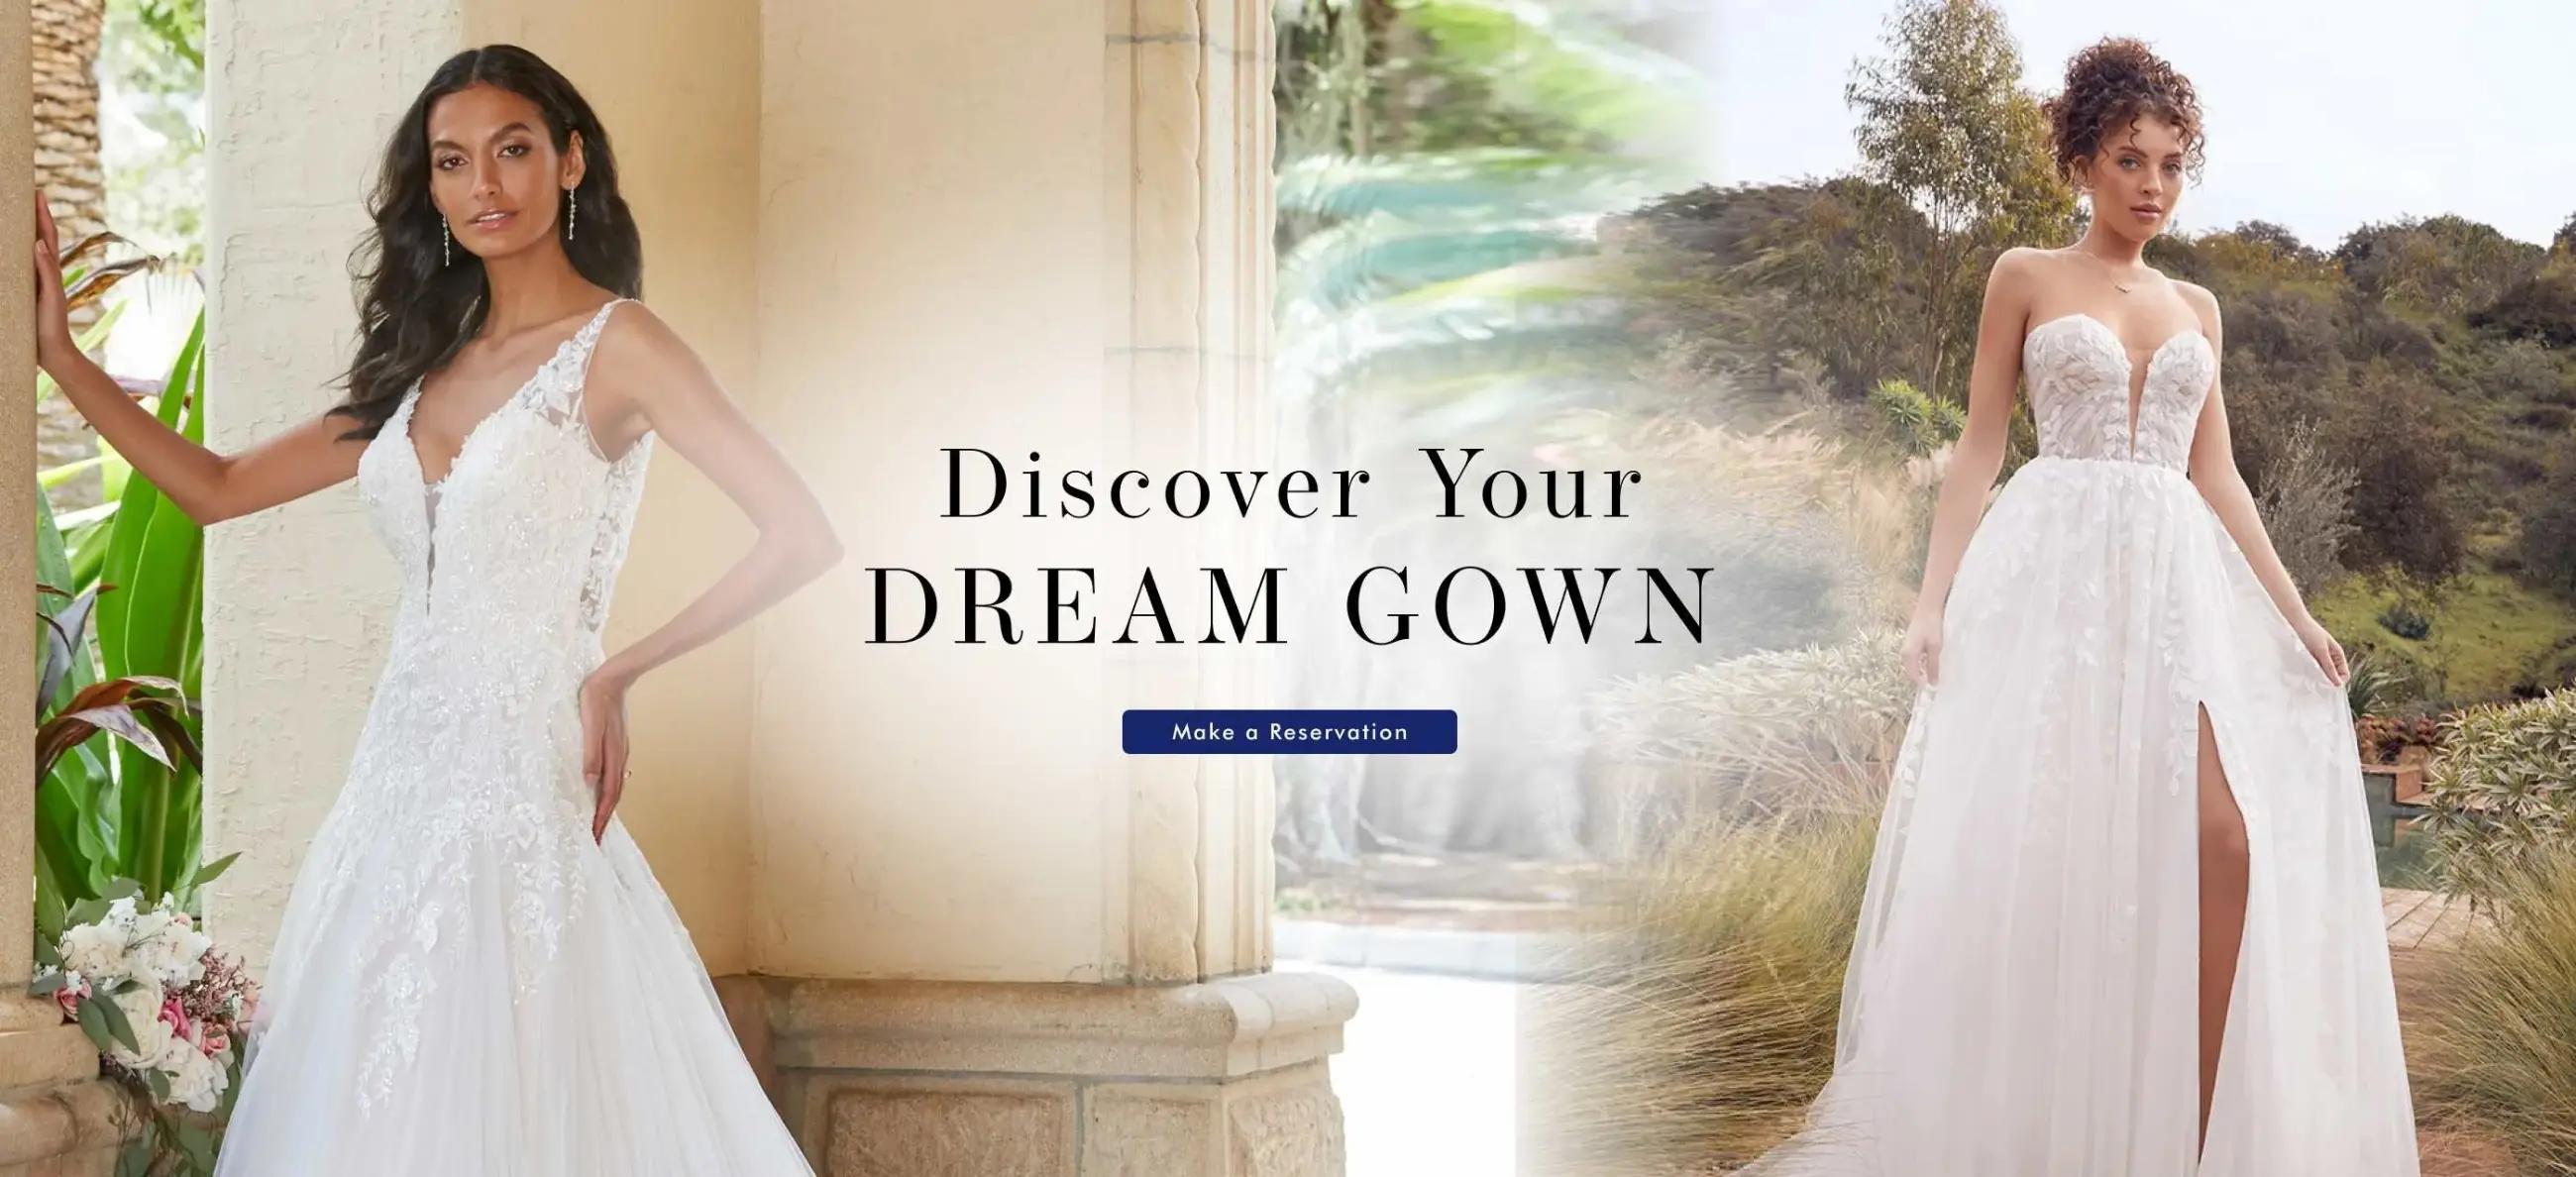 Discover Your Dream Gown desktop banner